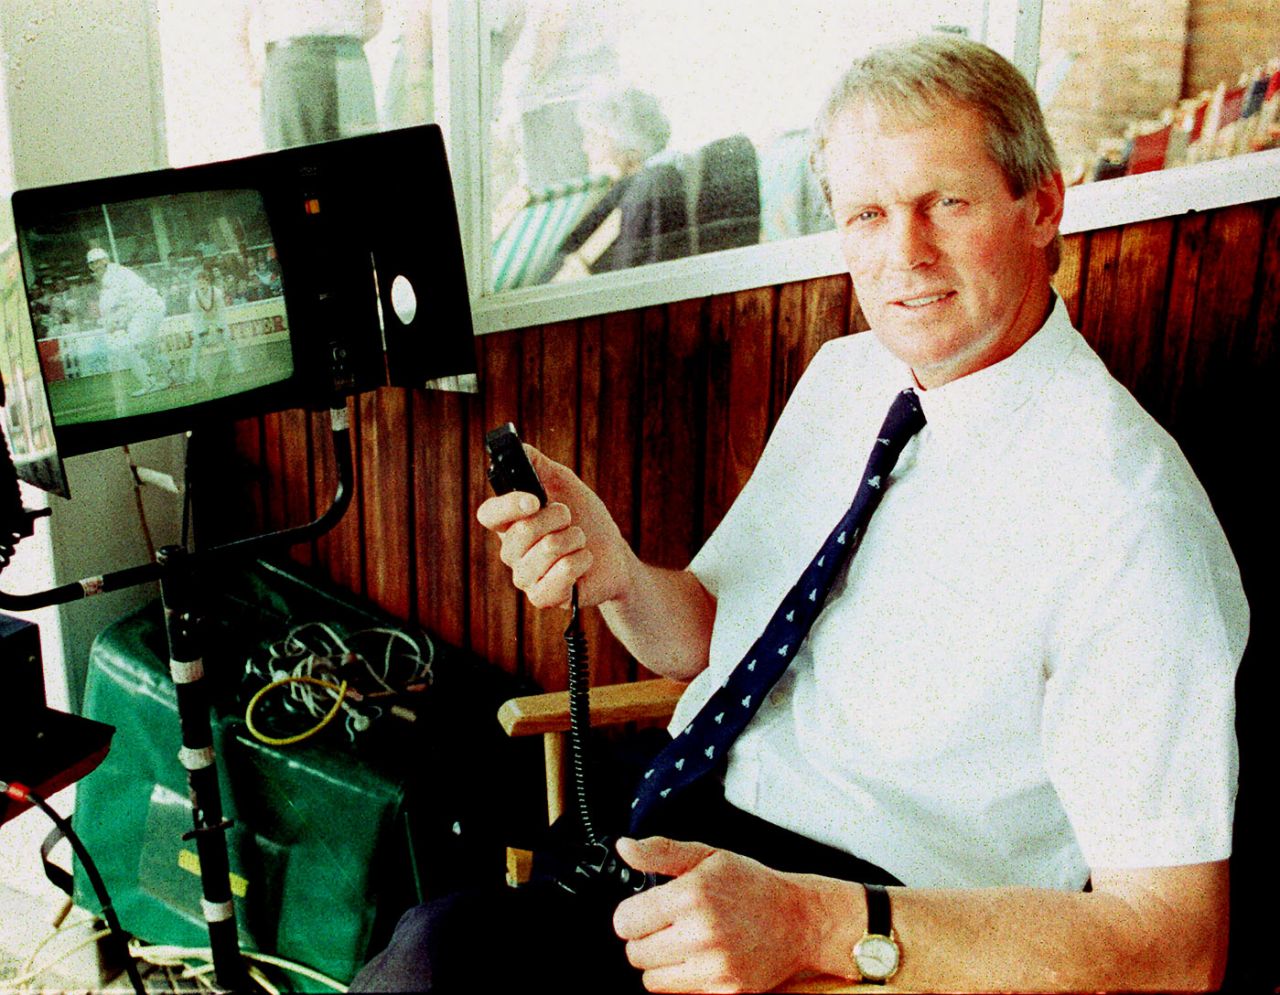 Umpire Chris Balderstone played professional cricket and football, June 8, 1993